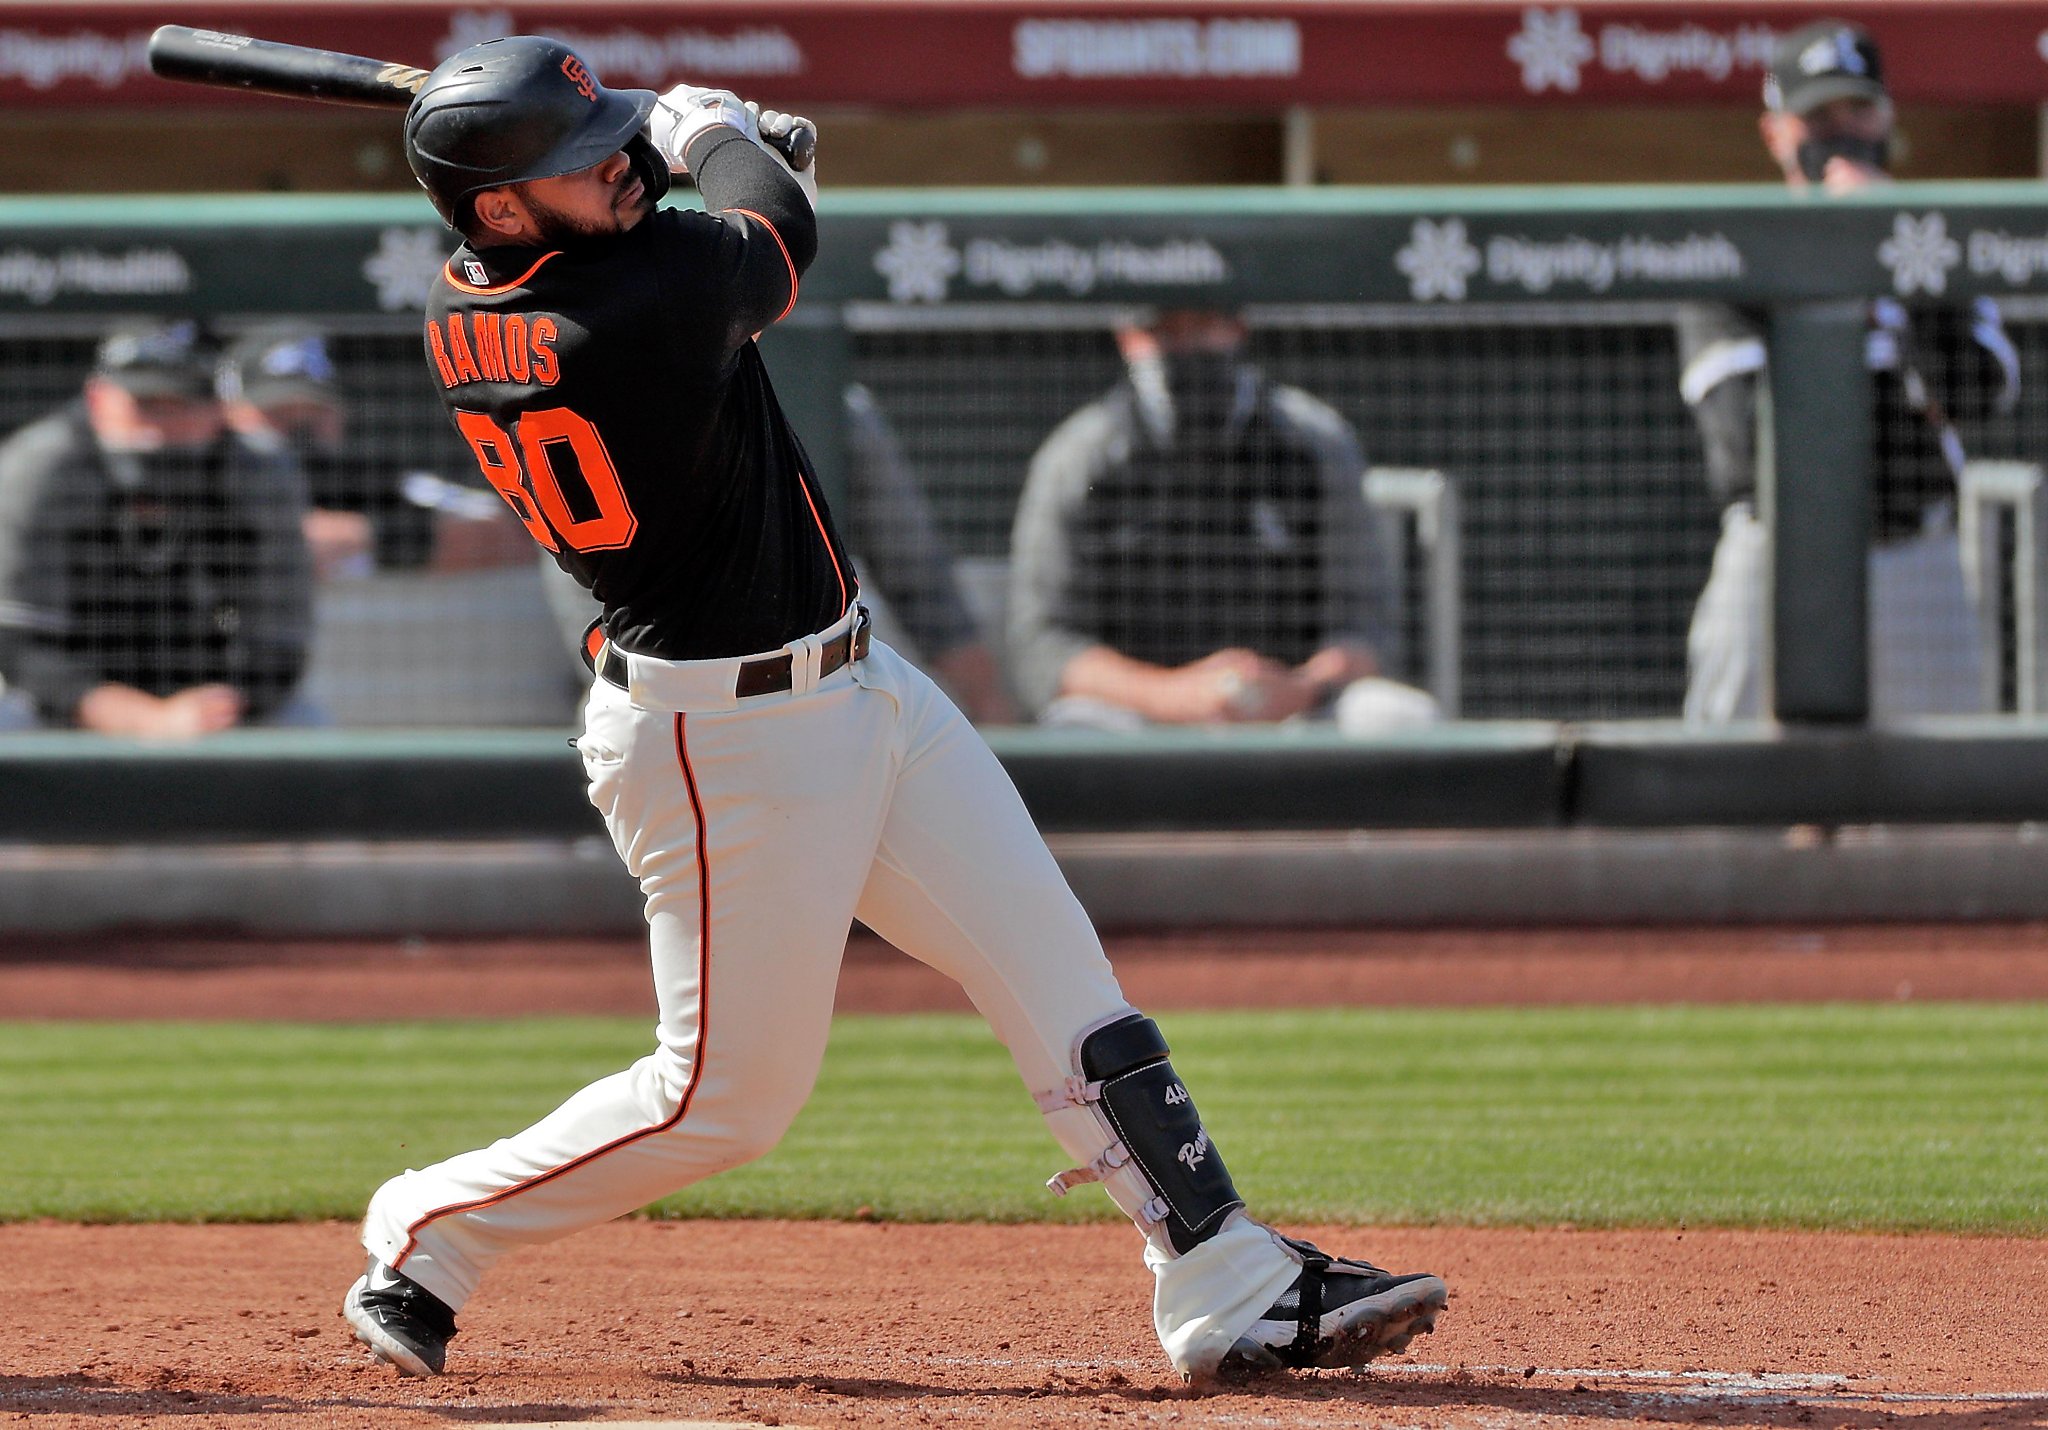 Giants' spring training observations: Have a day, Heliot Ramos